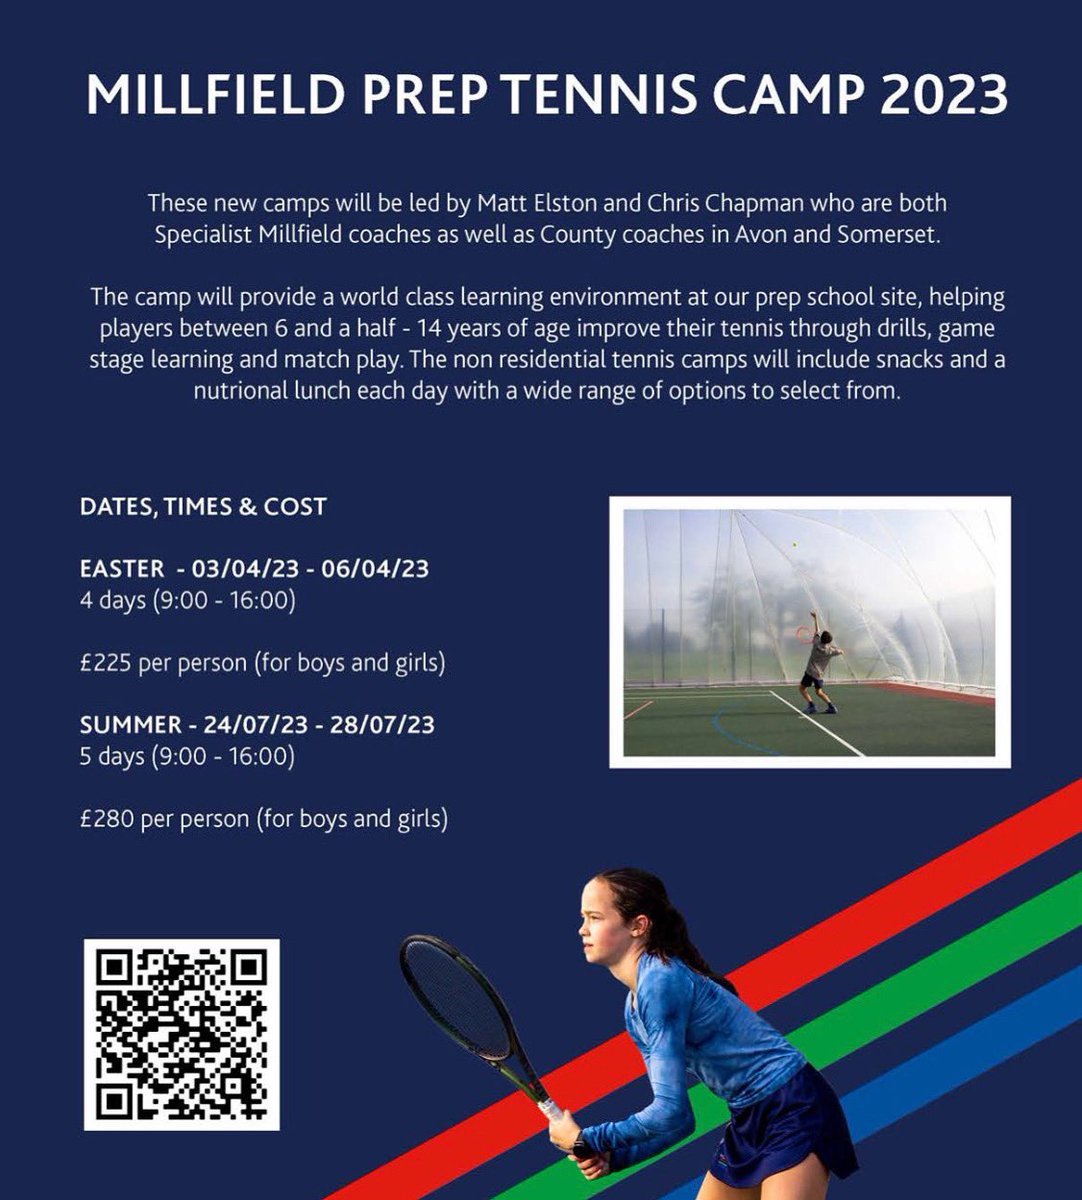 🚨Easter Tennis Camps🚨 🔴Camps lead by specialist Millfield and County coaches 🟢Age - 6.5-14 years old 🔵Book on now before it’s too late! Link below: millfieldenterprises.com/courses-and-ac… @SomersetLTA @AvonTennisUK @MillfieldSport @millfieldtennis @MillfieldEnts